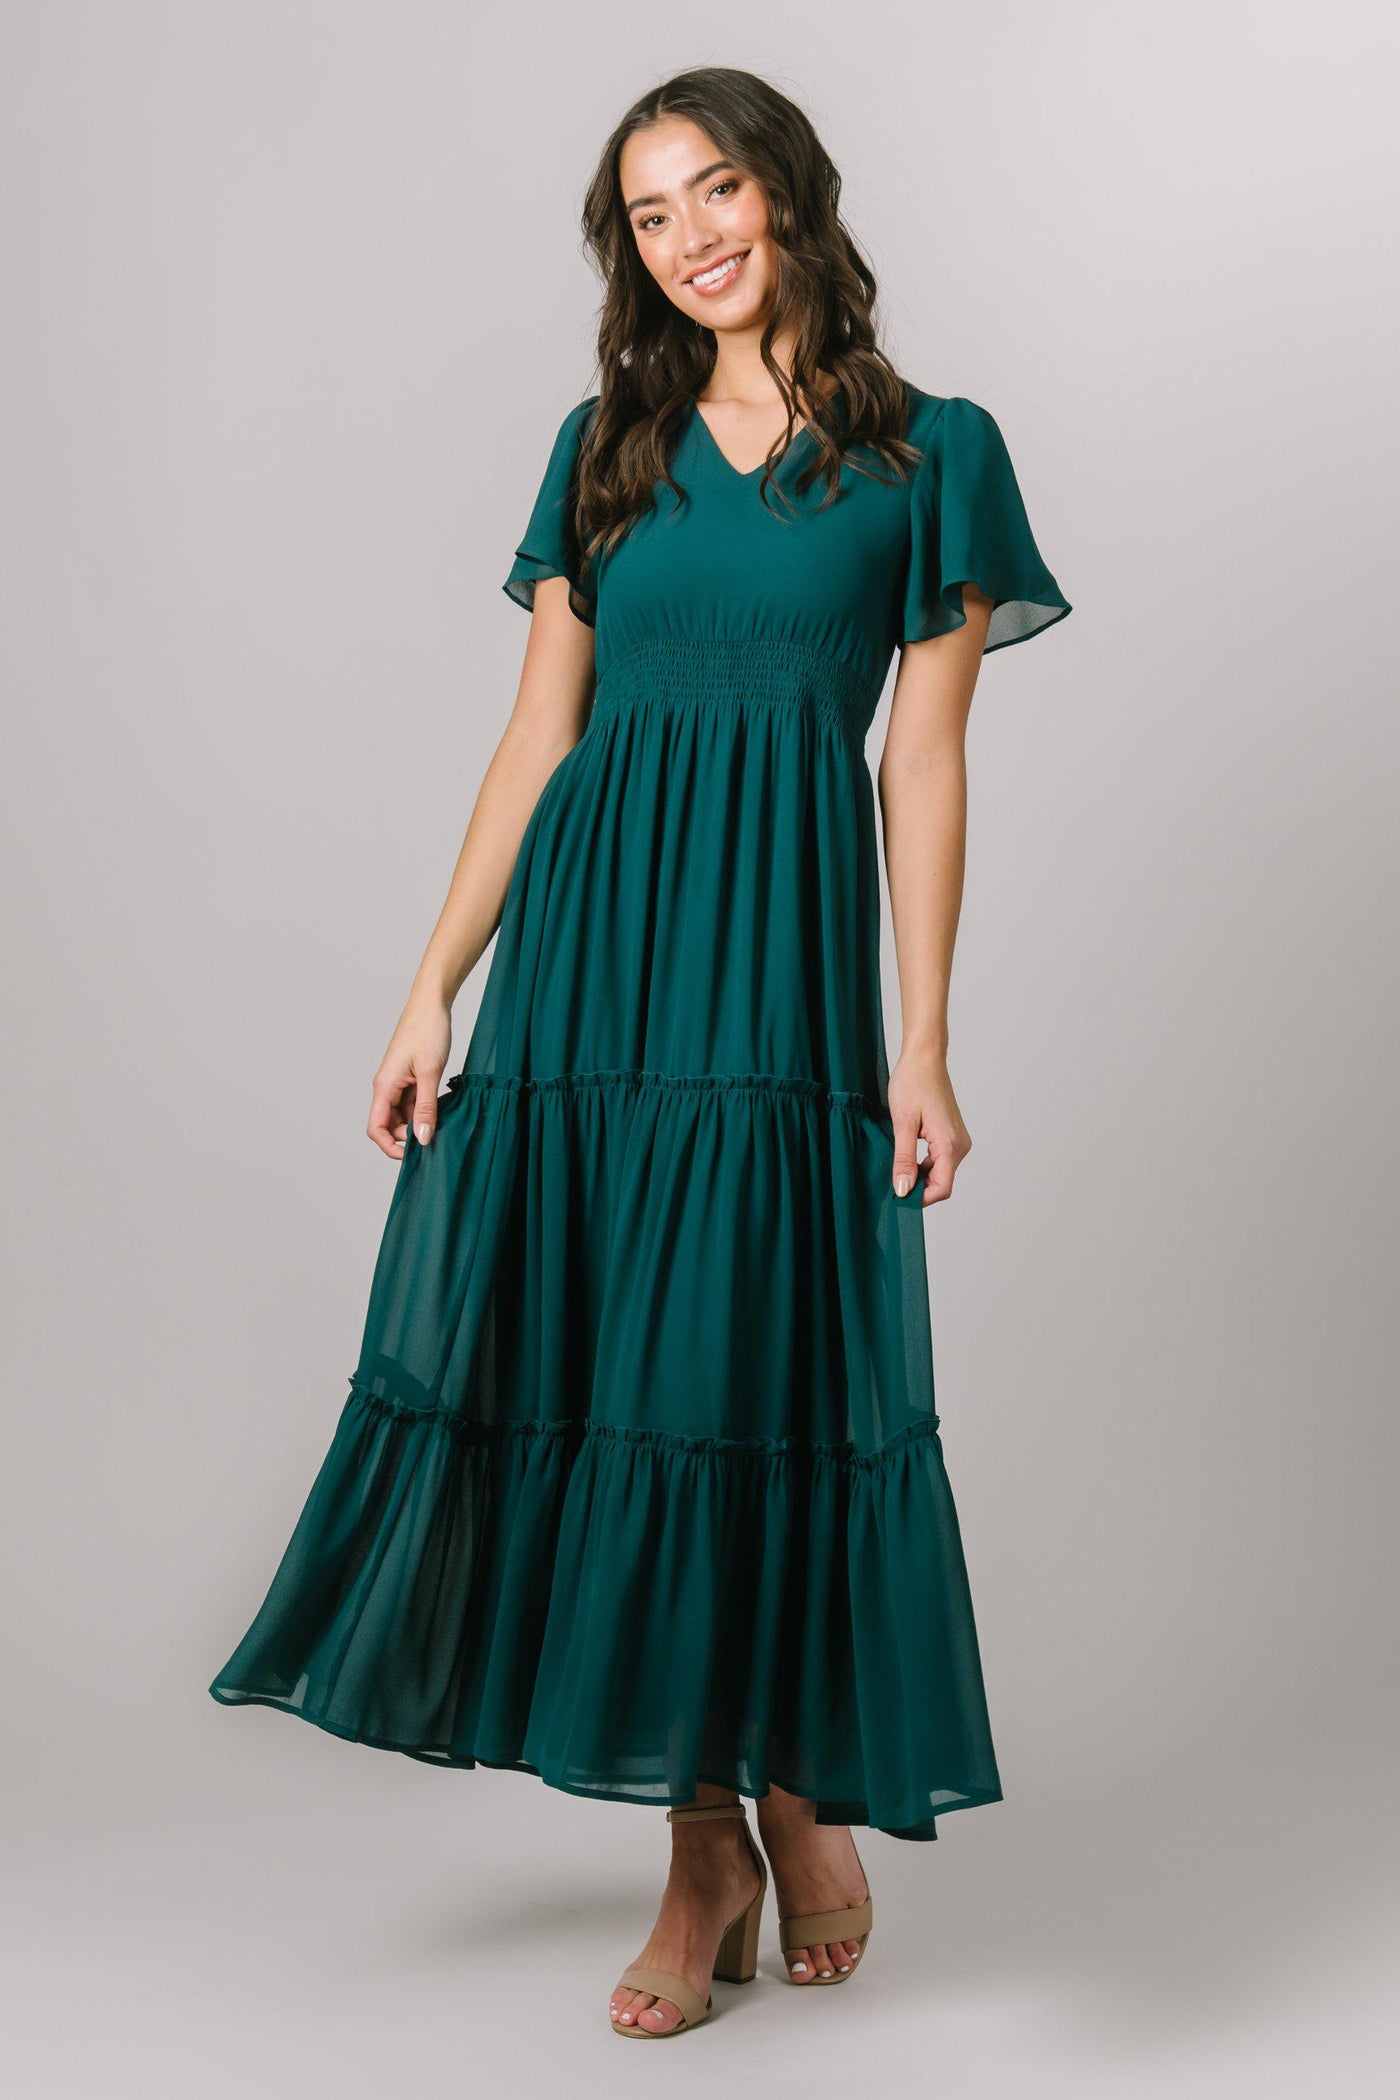 This fun Modest Dress features flutter sleeves, a cinched waist and tiered skirt. - Modest Dresses -Modest Clothing - Modest Bridesmaid Dresses